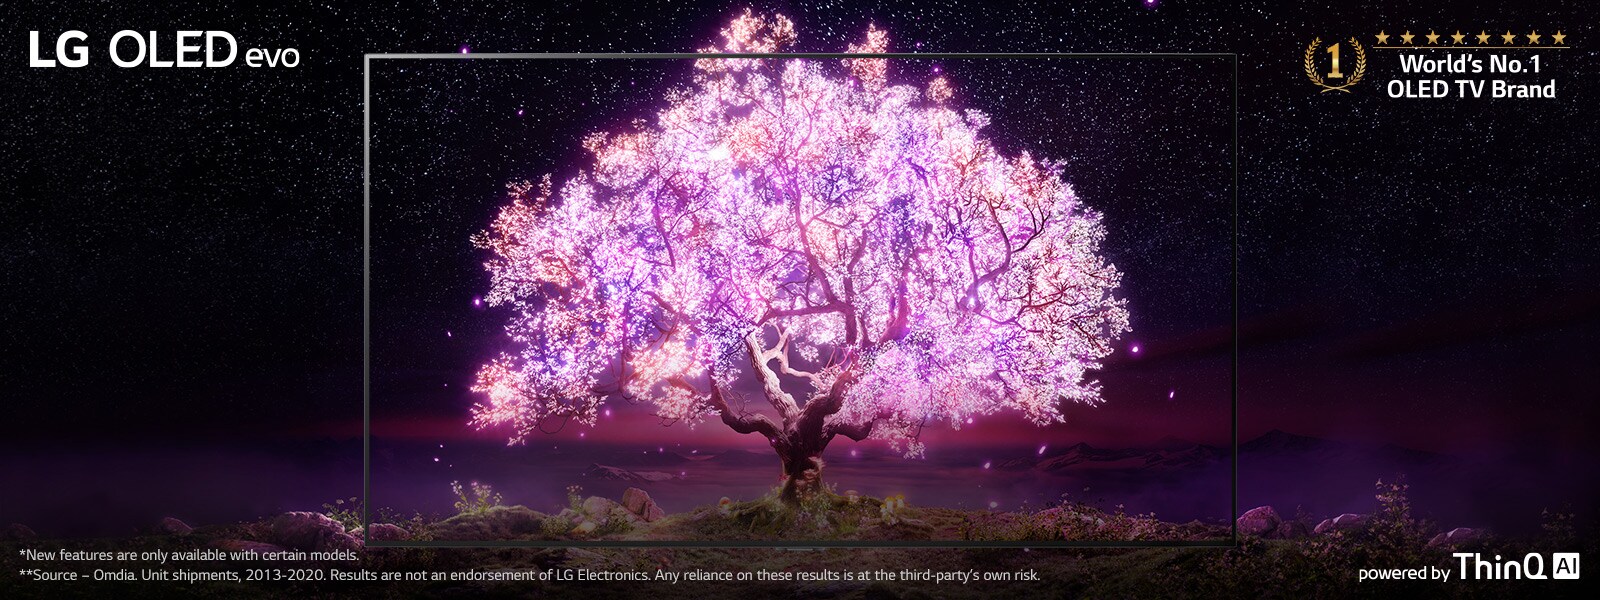 The scene where the OLED TV frame is overlapped with the image showing a tree shining in pink. The'World's No.1 OLED TV Brand' logo was placed on the upper right. The 'powered by ThinQ AI' logo was placed at the bottom right. 'LG OLED evo' logo was placed on the upper left corner.